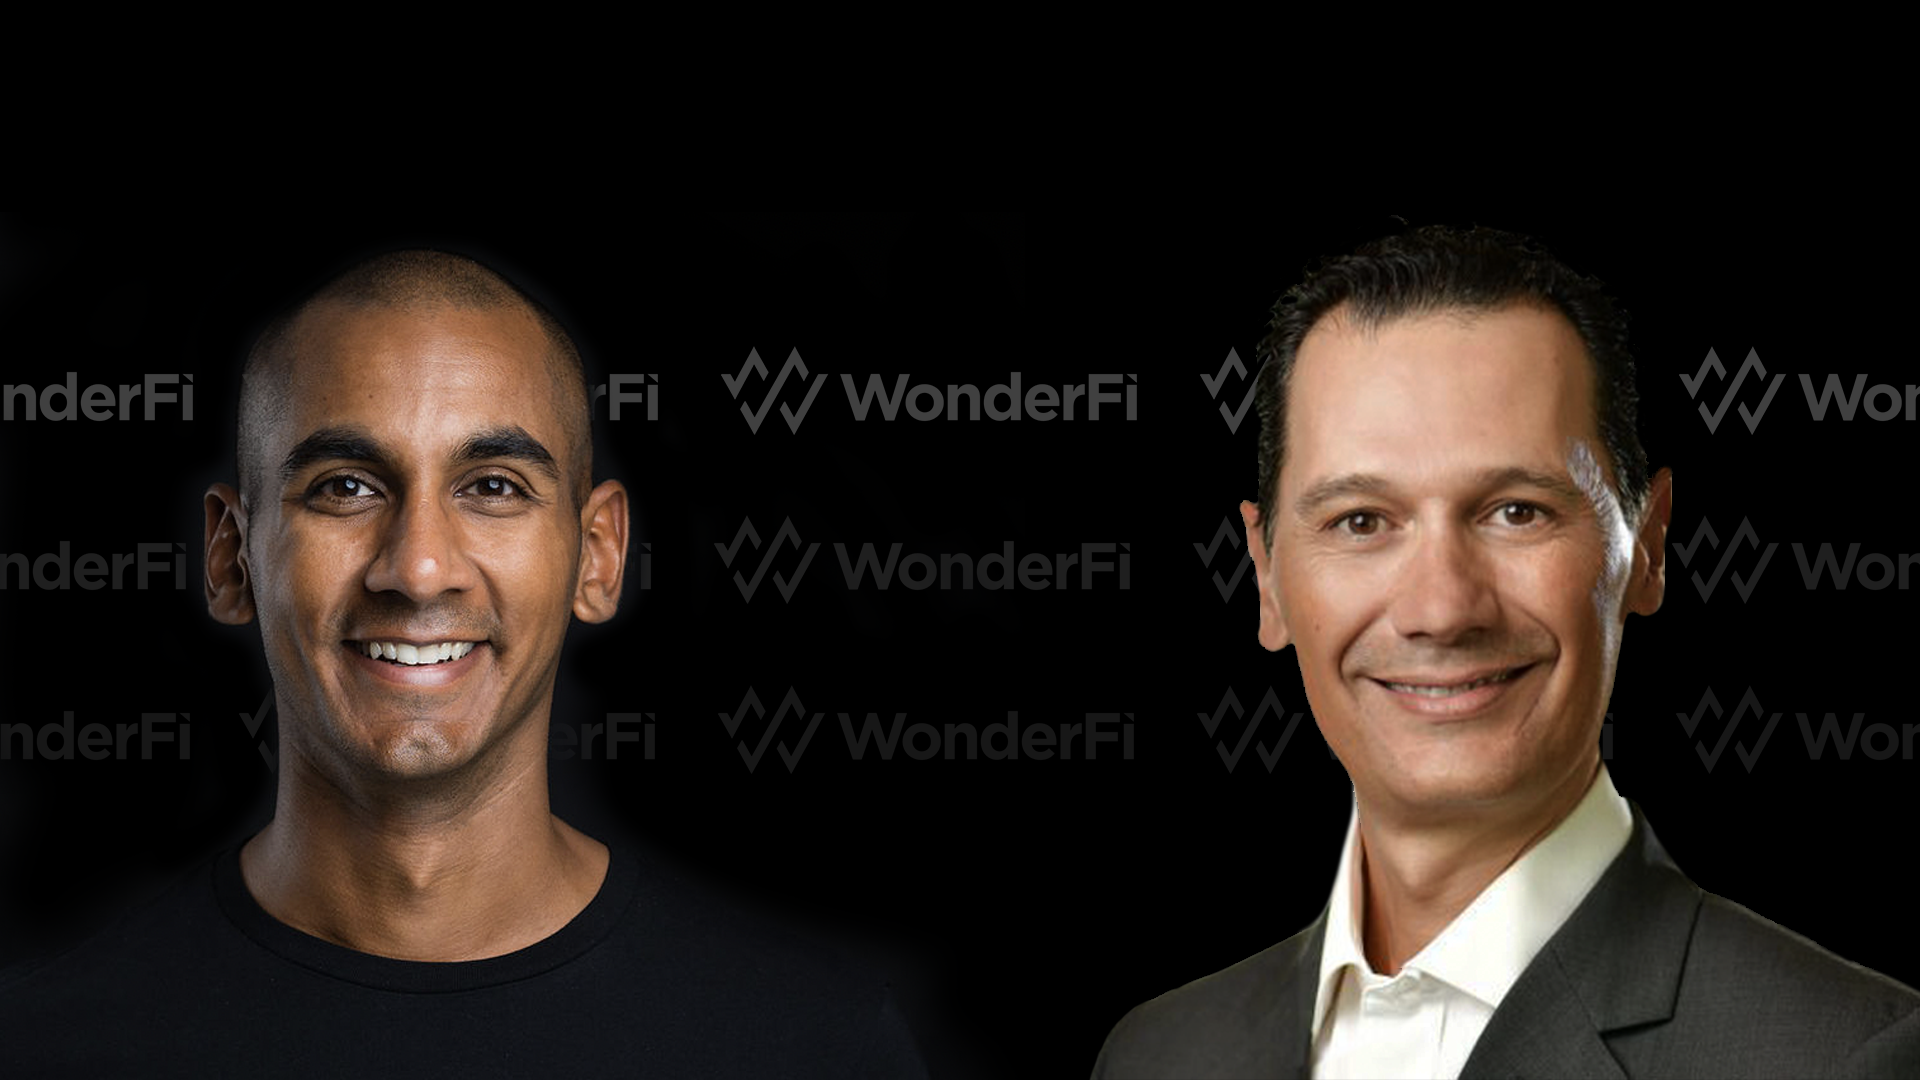 WonderFi Looks Beyond Growth With Appointment Of New Chair, Bill Koutsouras